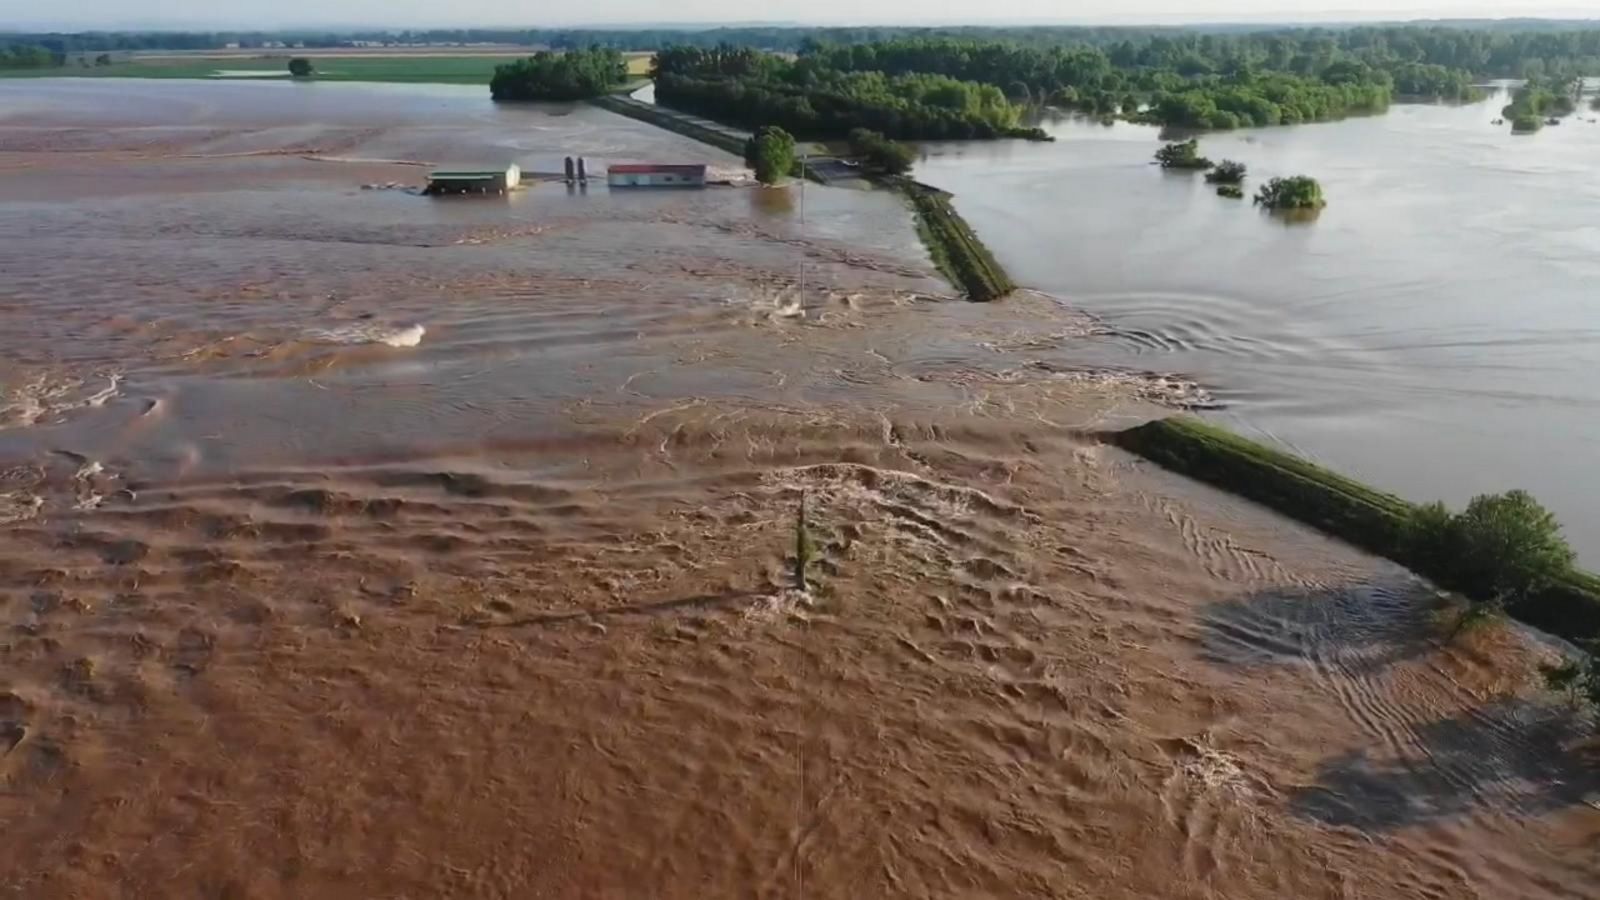 Emergency evacuations due to flooding in Arkansas Good Morning America